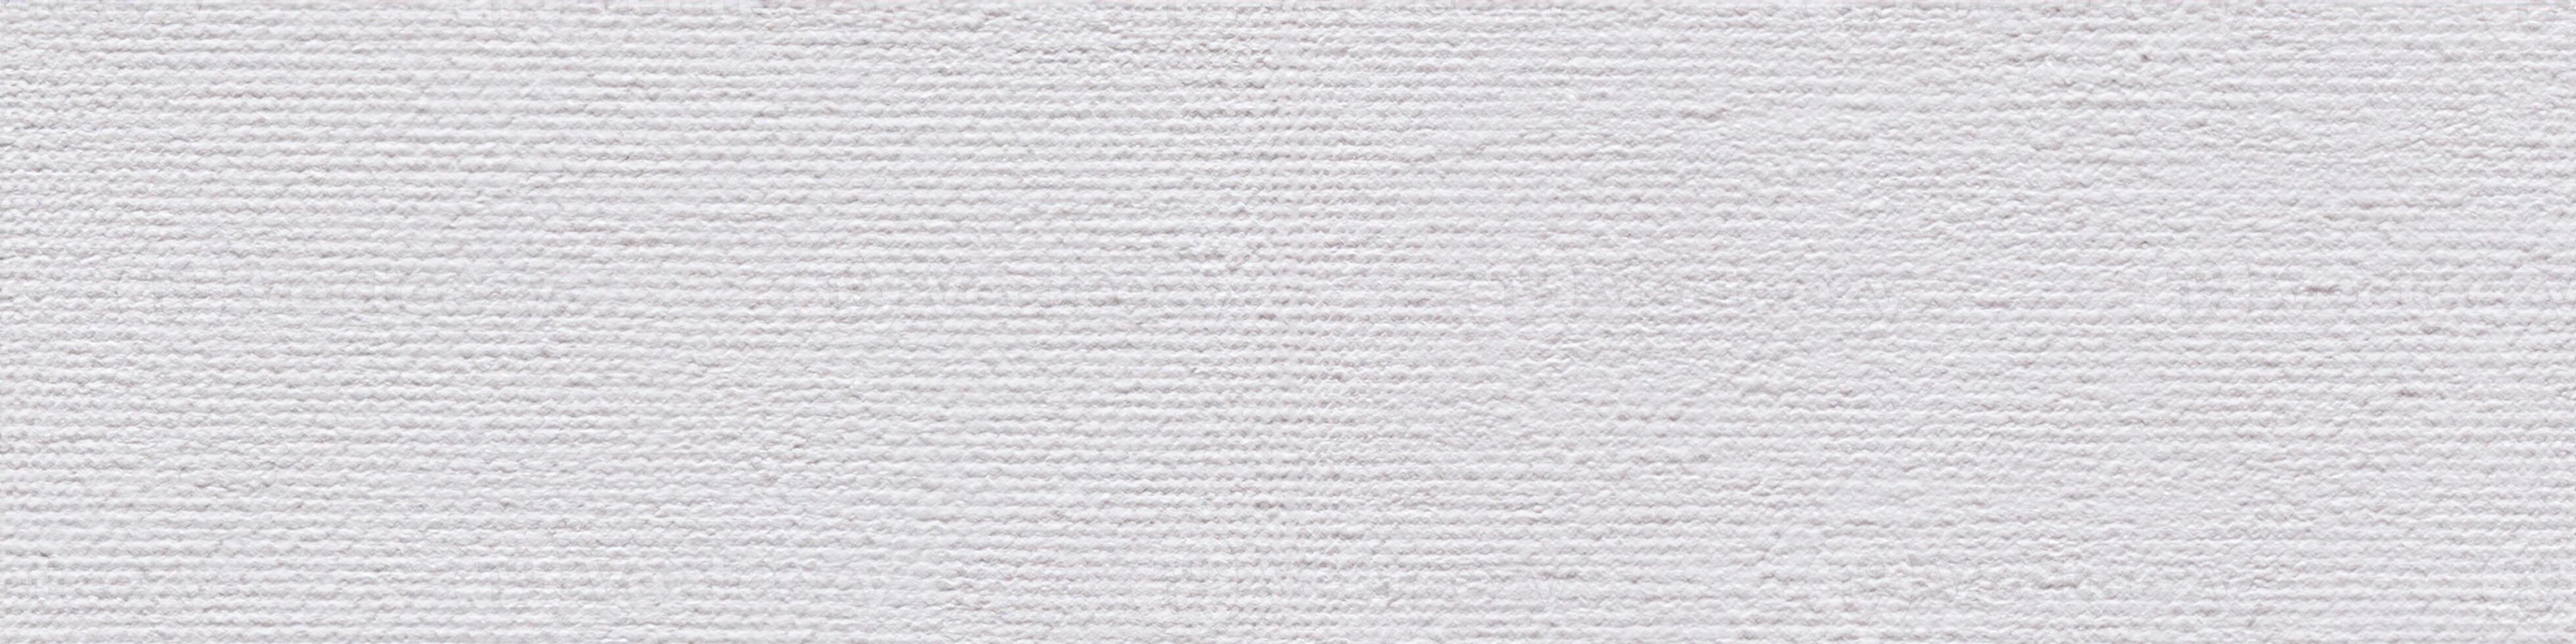 Classic white acrylic canvas background as part of your creative work. Seamless panoramic texture. photo